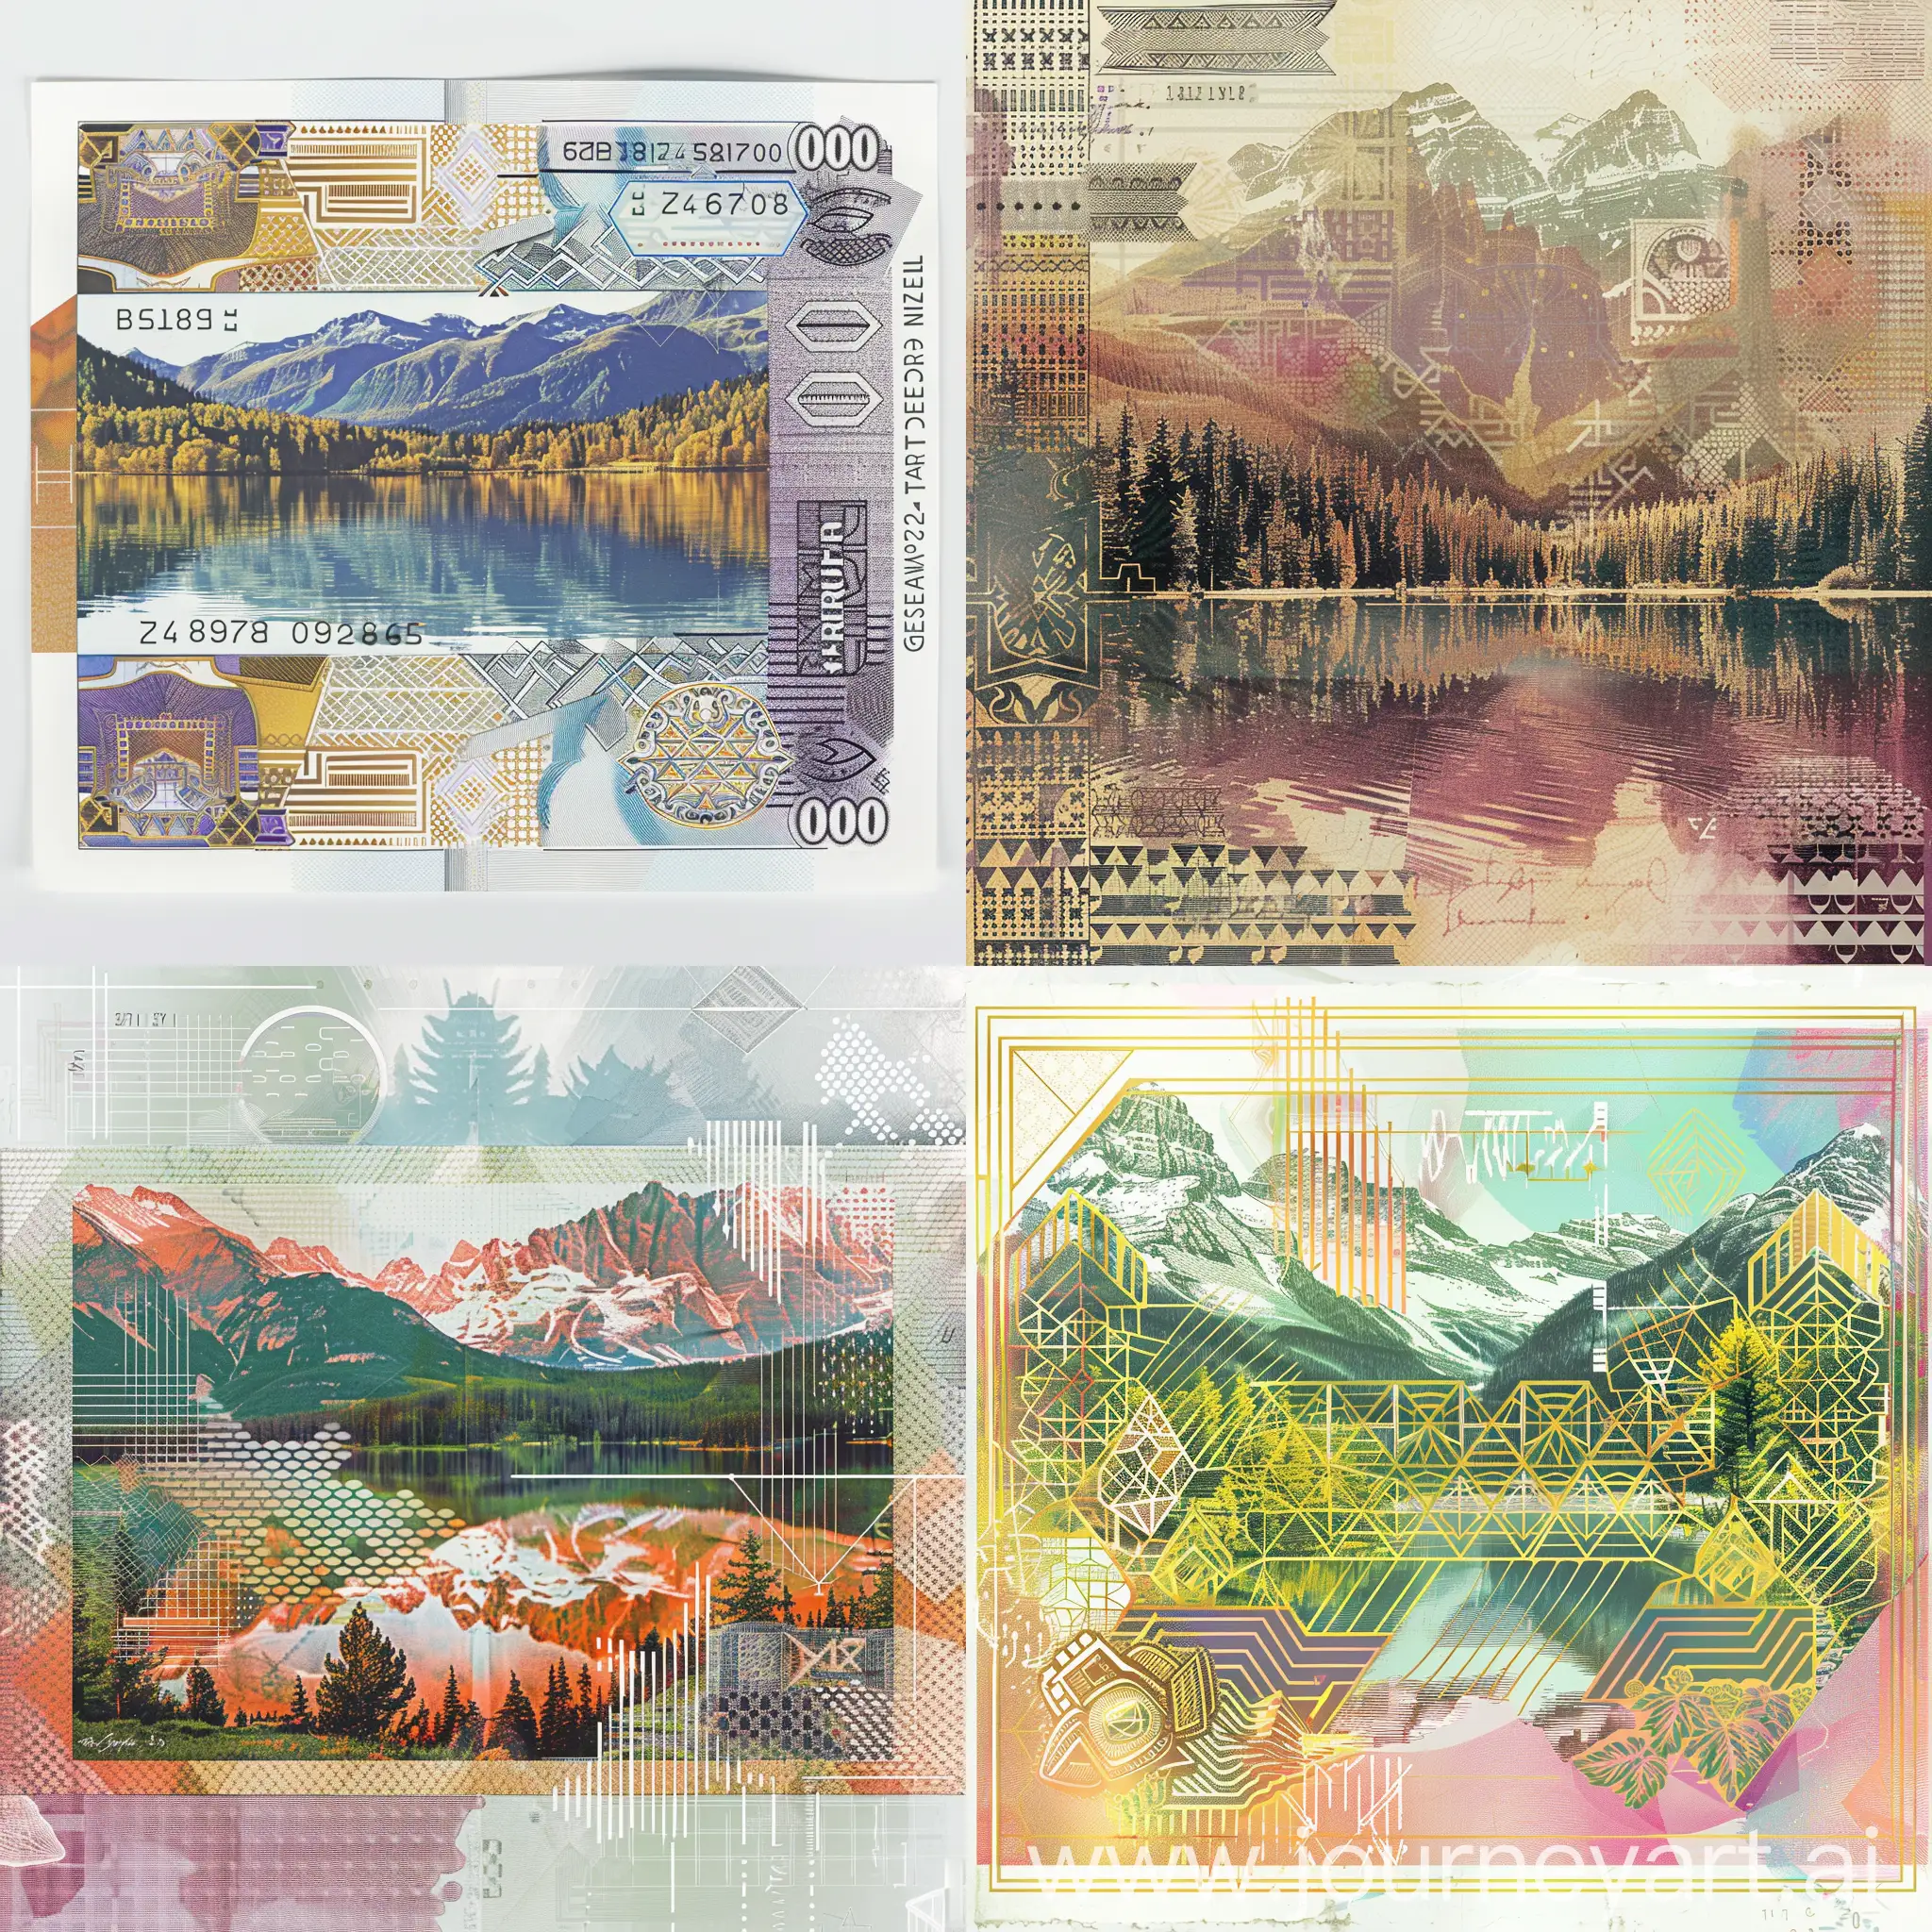 A MODERN BANK NOTE, WITH A NATURAL LANDSCAPE ON IT, INCLUDES GEOMETRIC PATTERNS